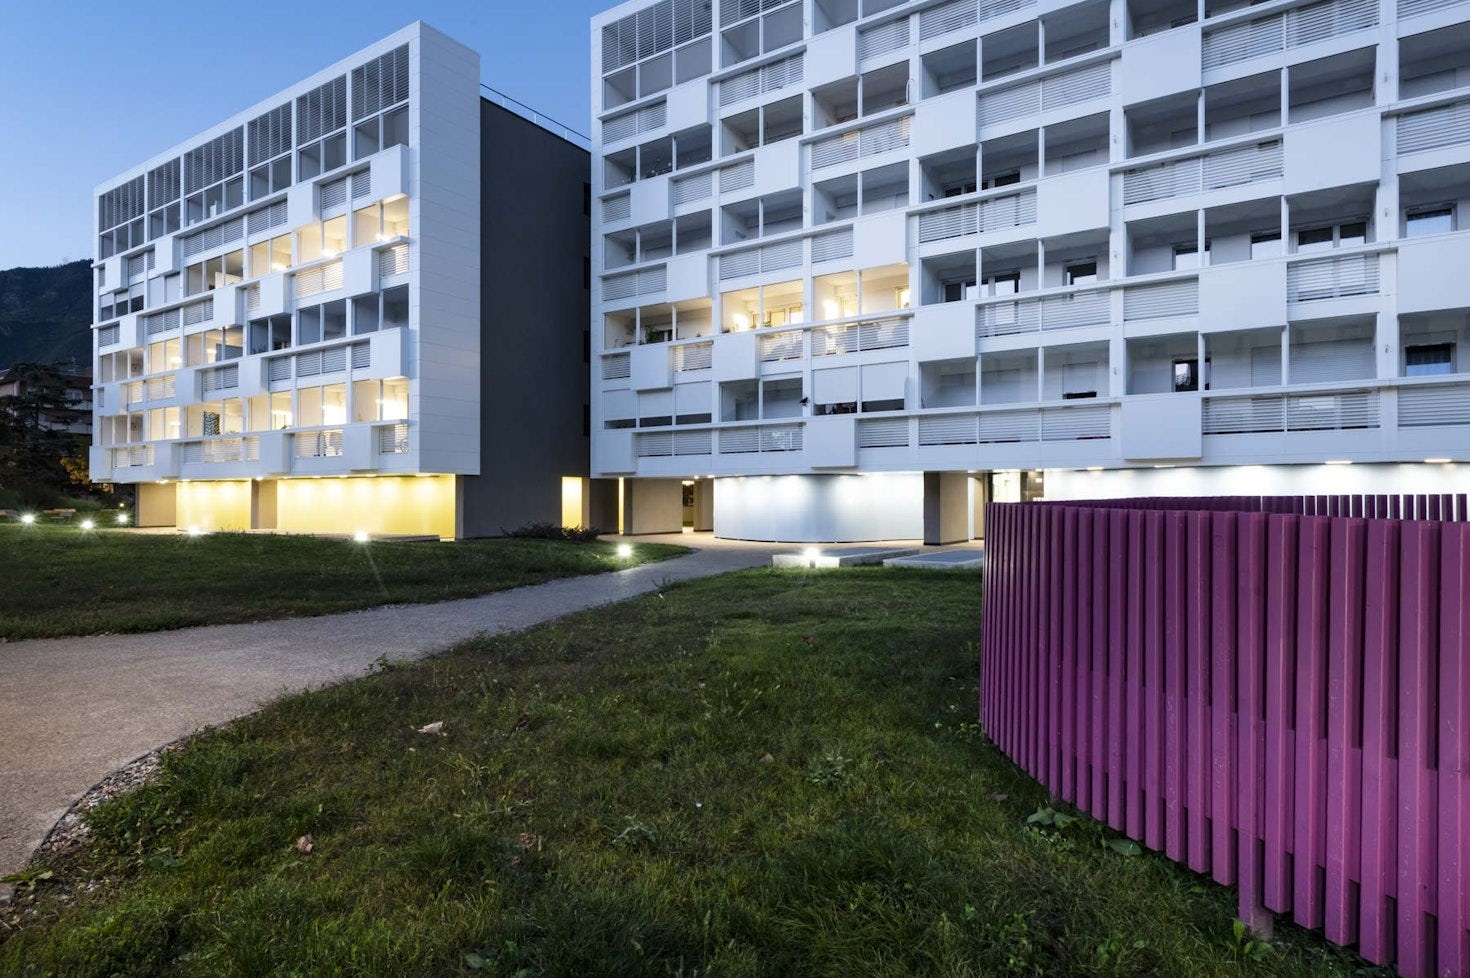 Refurbishment of social housing in Bolzano as part of the SINFONIA Project.